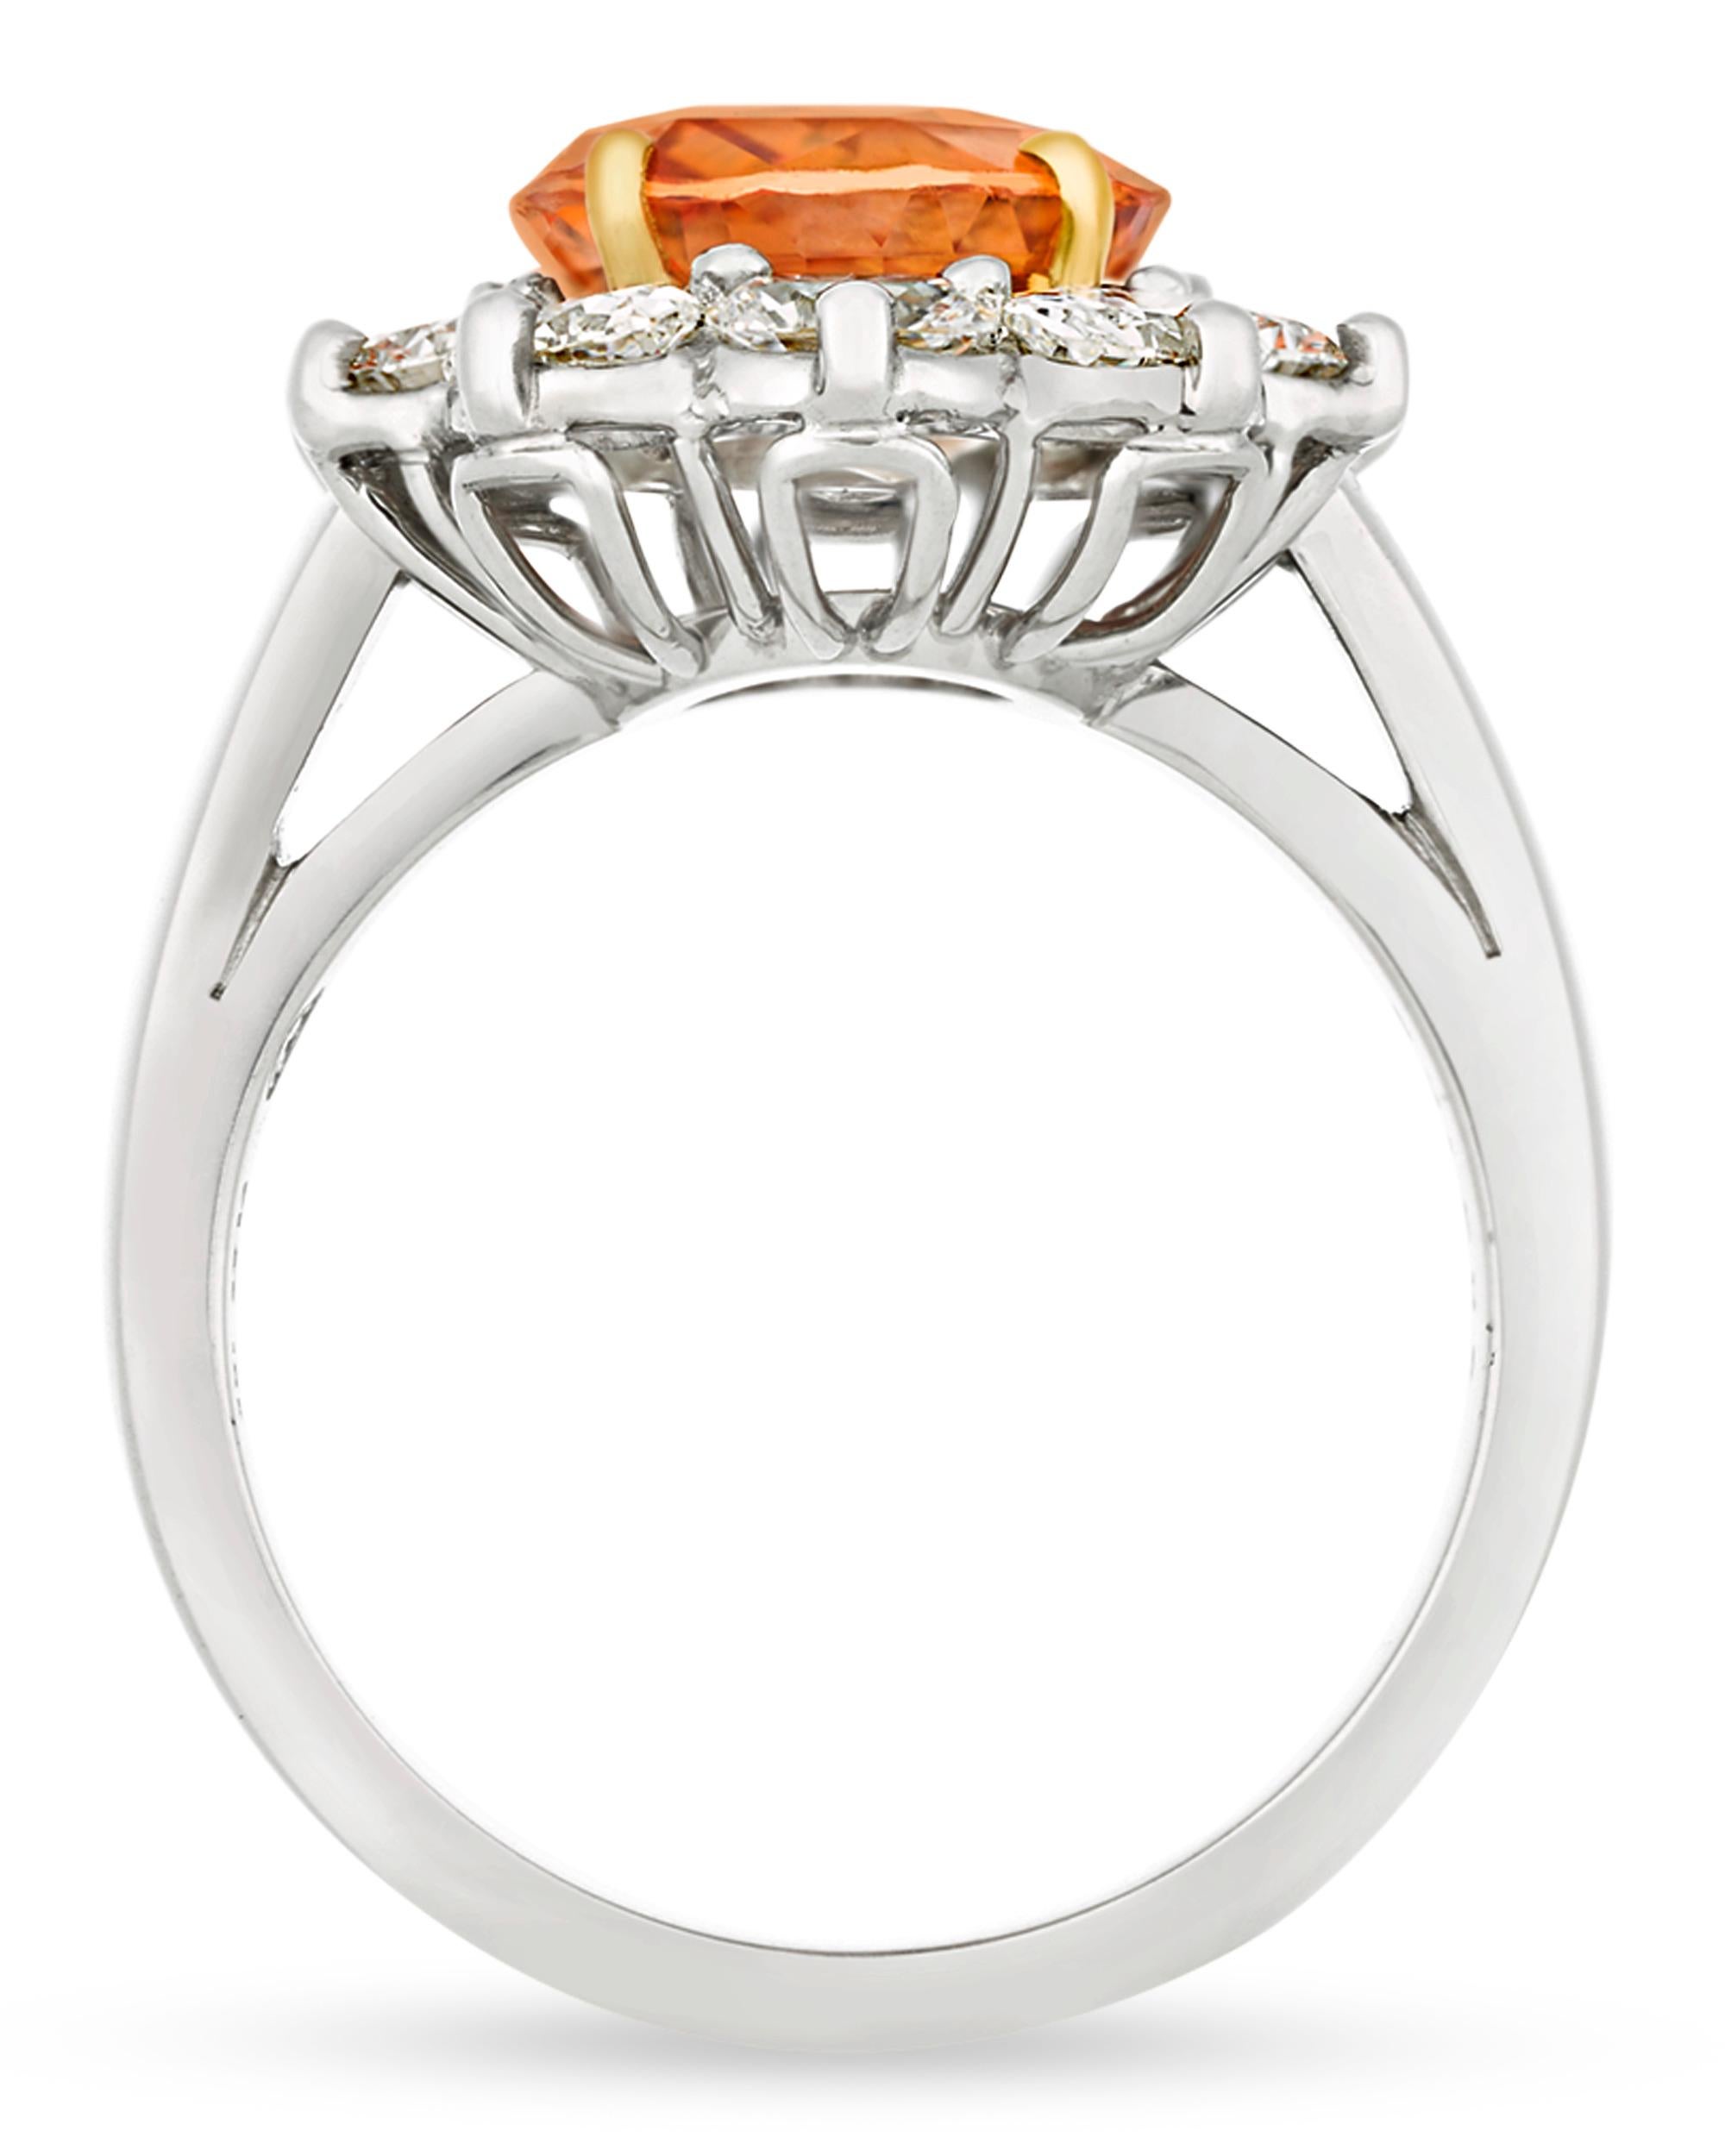 This classic ring by Oscar Heyman features a fancy orange Ceylon sapphire, one of the rarest of all fancy colored sapphires. Weighing 4.38 carats, the oval mixed-cut jewel displays a superb orange hue and is certified by C. Dunaigre as Ceylon in